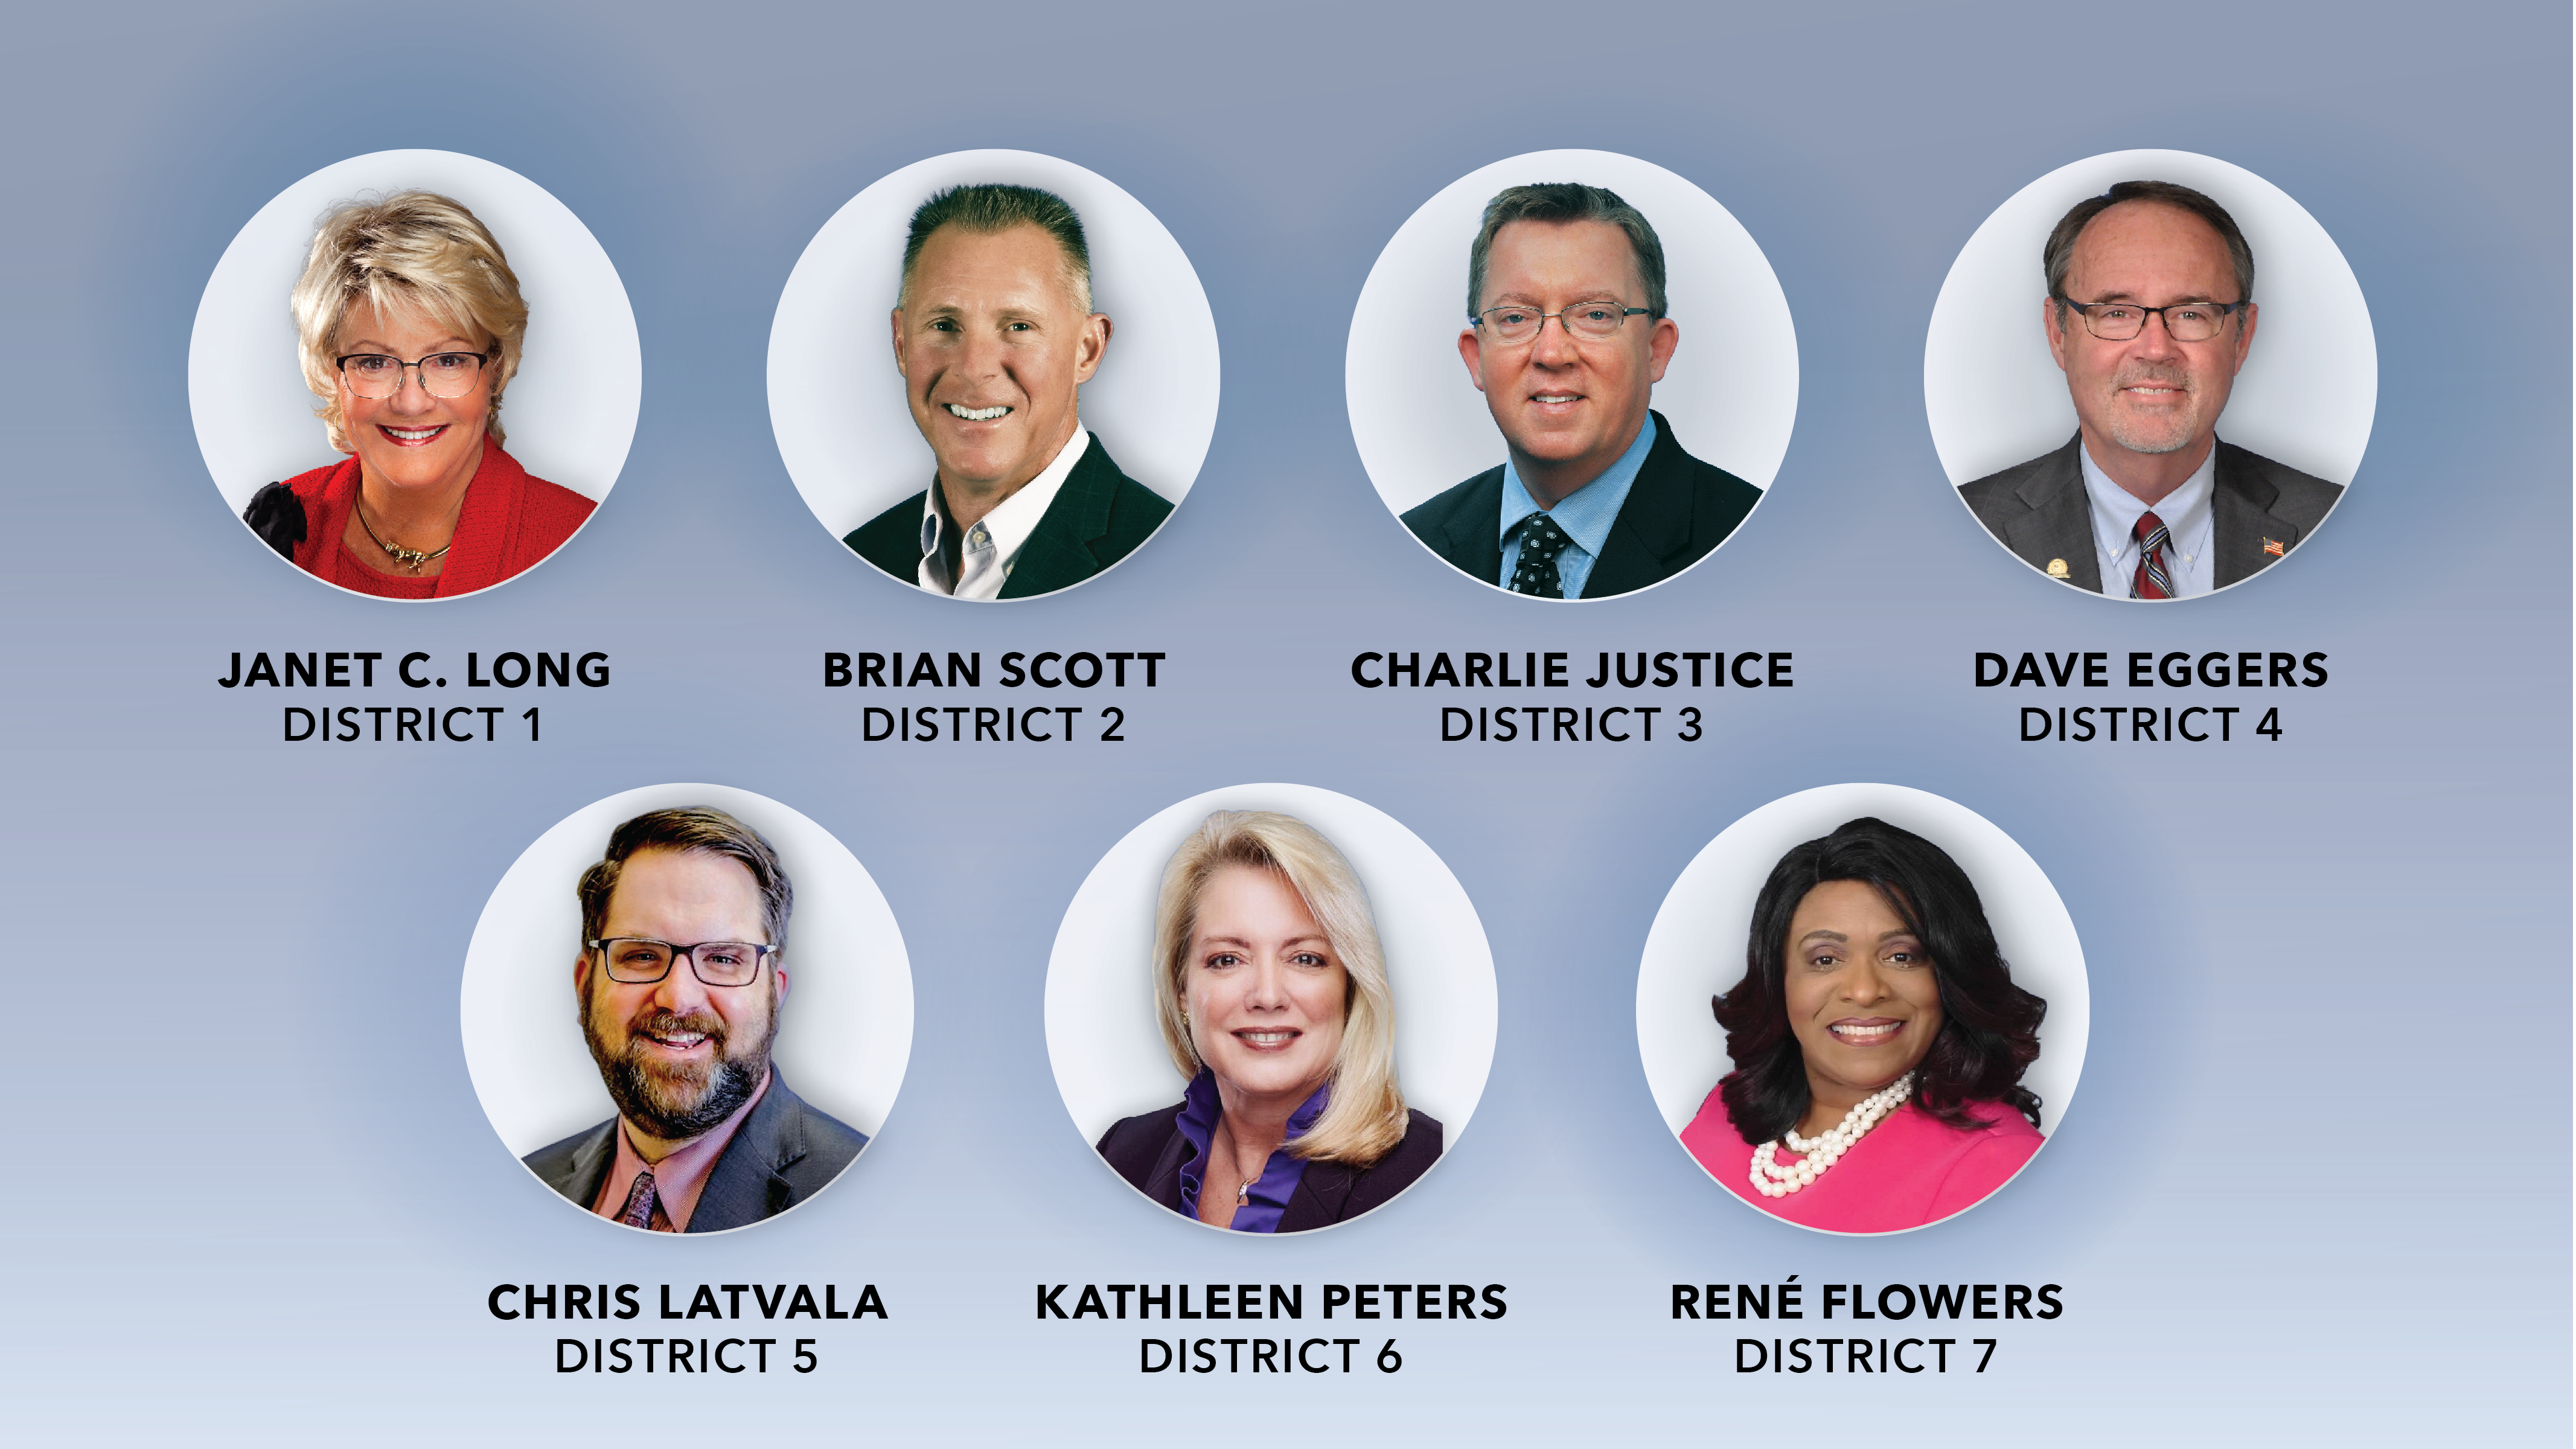 individual photos of each Pinellas County Commissioner